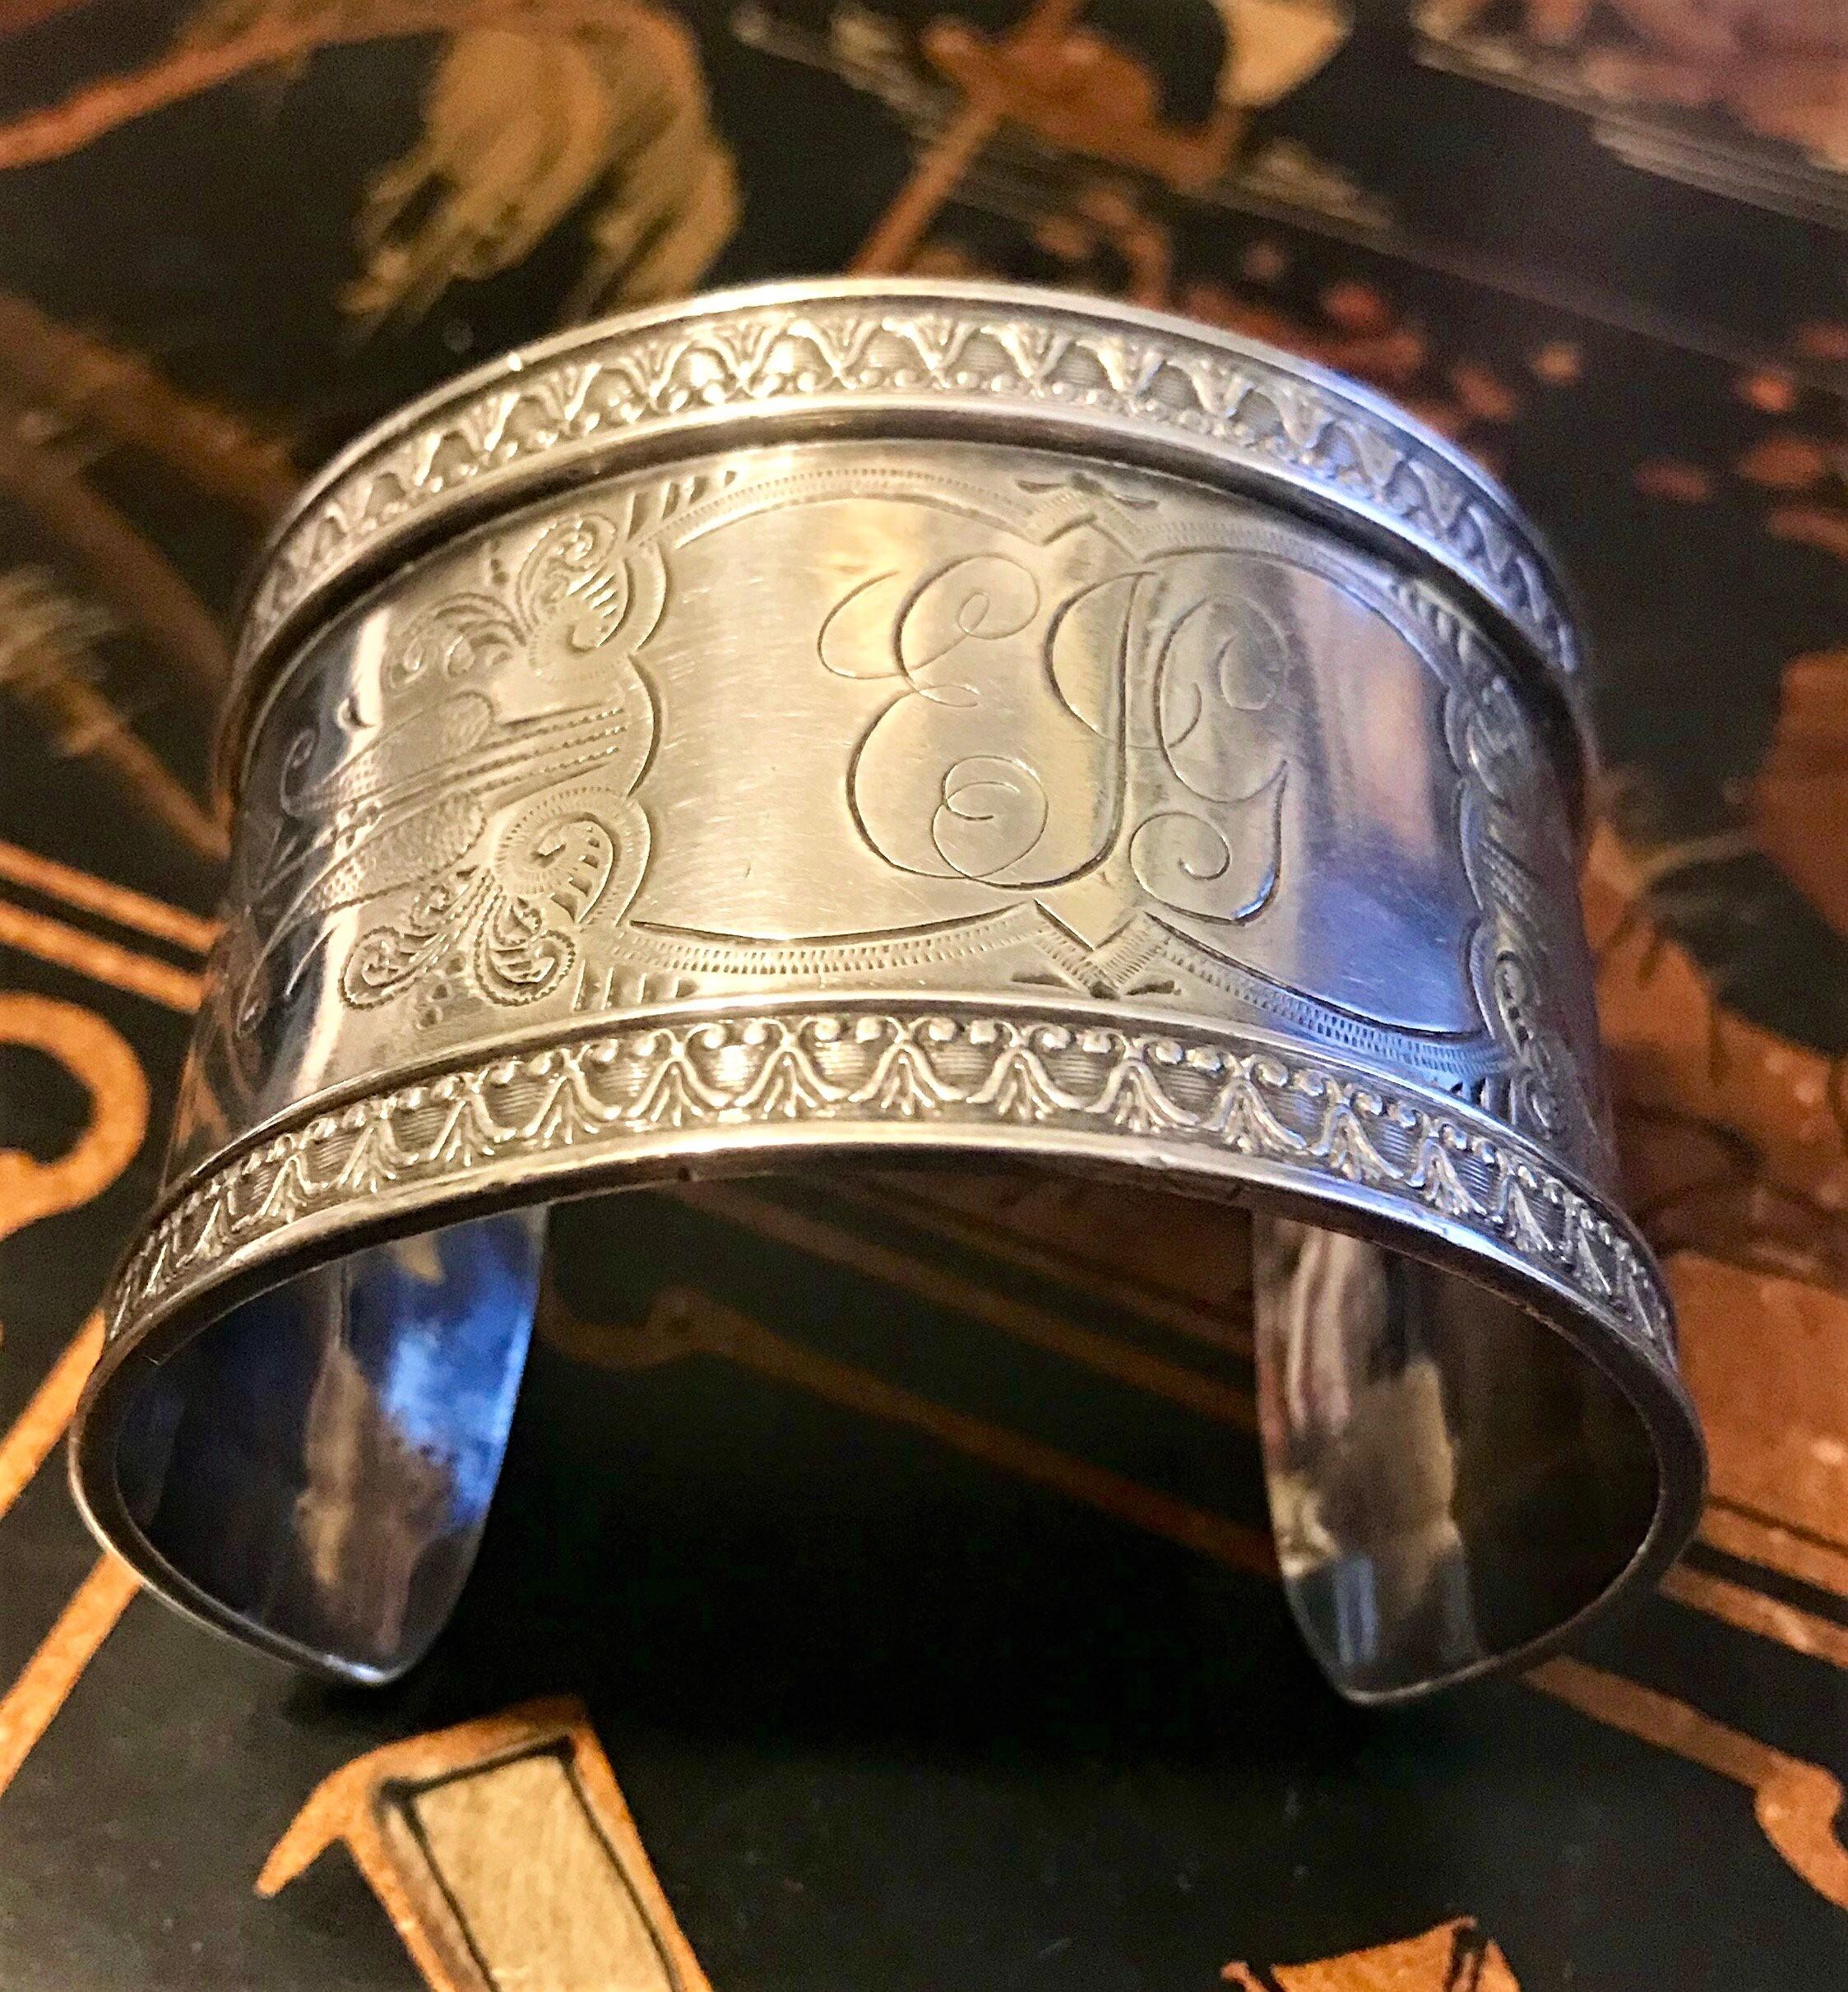 Circa 1900 sterling silver cuff bracelet with an engraved cartouche surrounded by an etched design.  The edges of the cuff are embellished with an ornate, raised sterling design and inside the cartouche is engraved with the initials EJG.   Inside